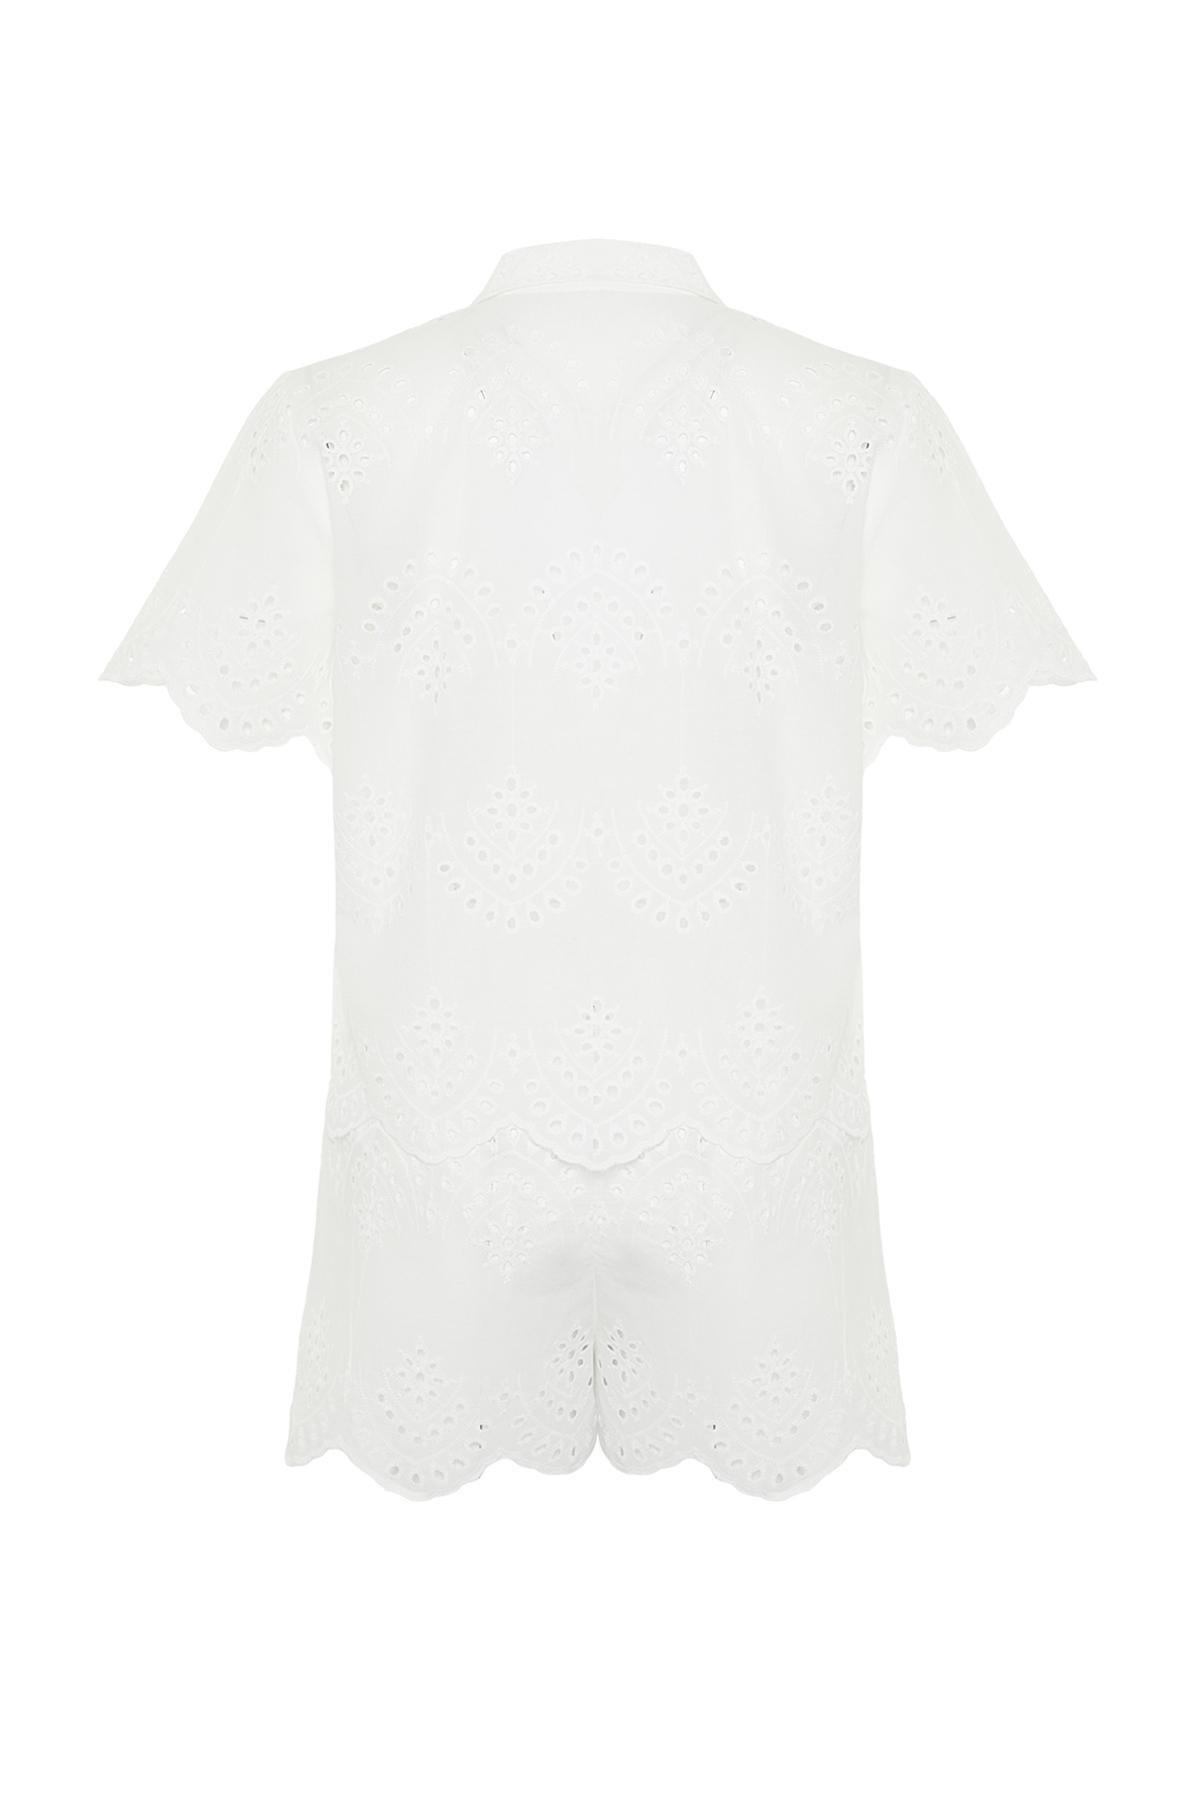 Trendyol - White Embroided Co-Ord Set